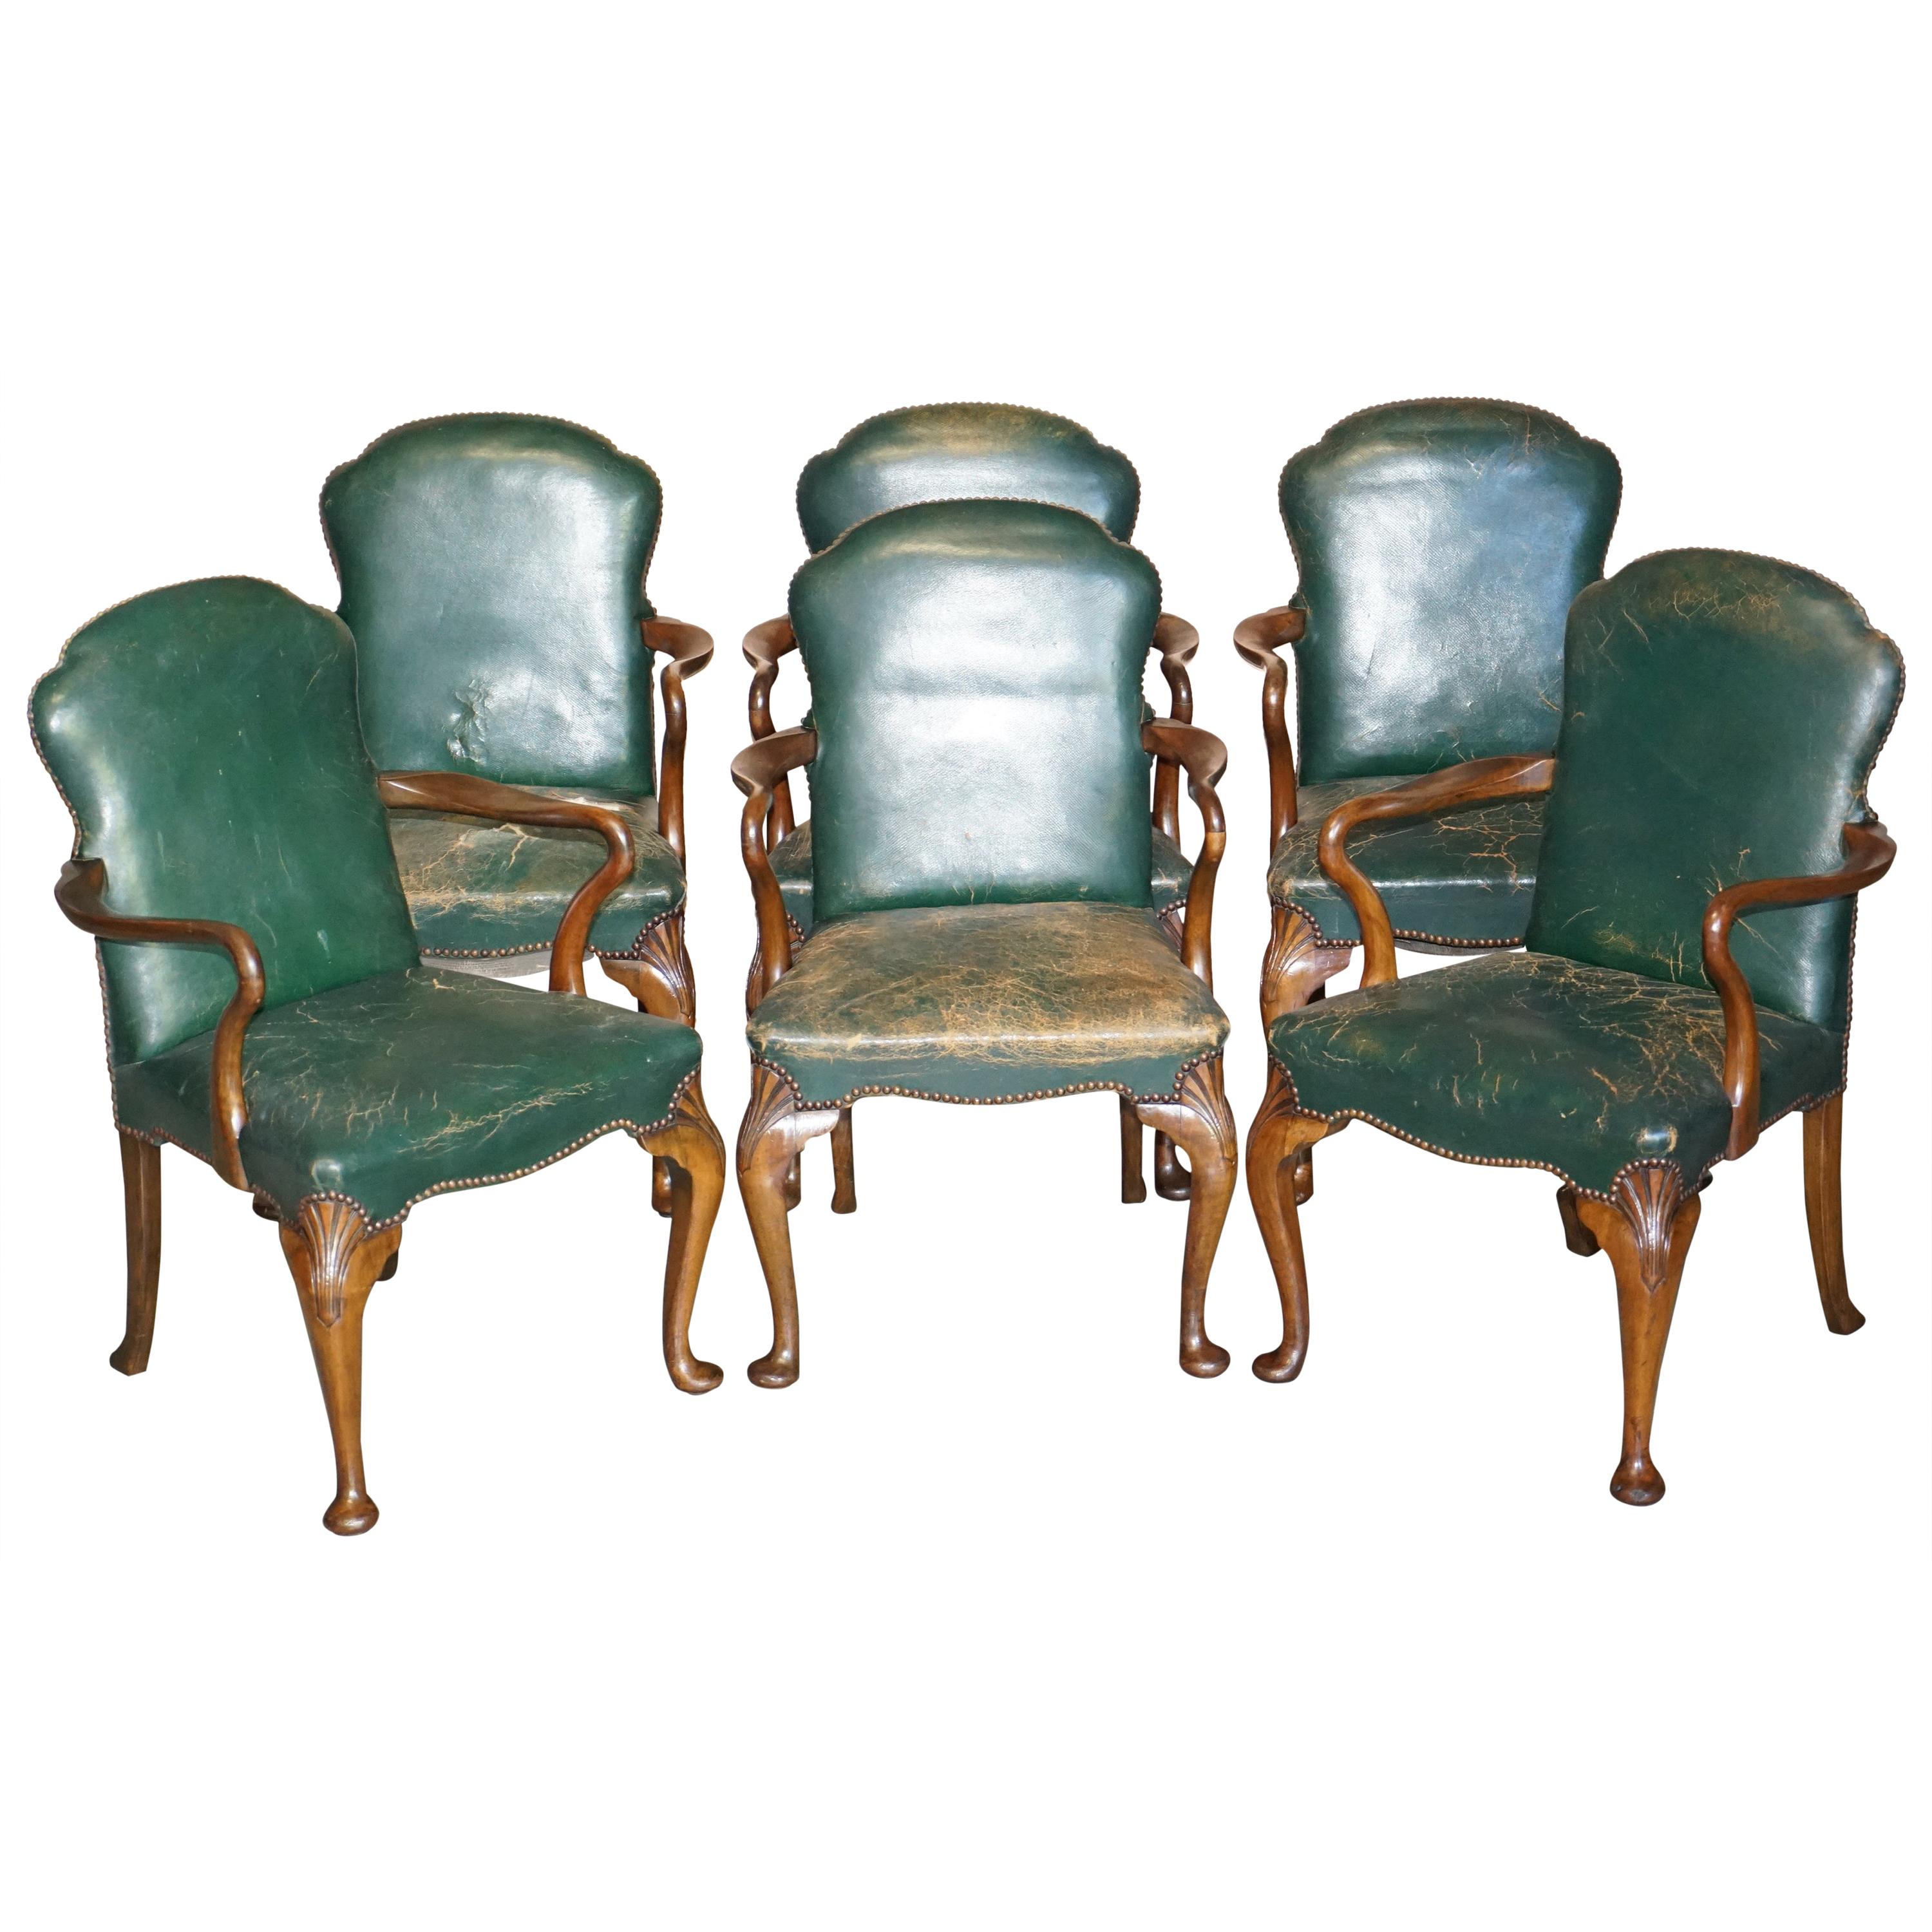 6 Victorian Walnut Green Period Leather Upholstery Shepherds Crook Dining Chairs